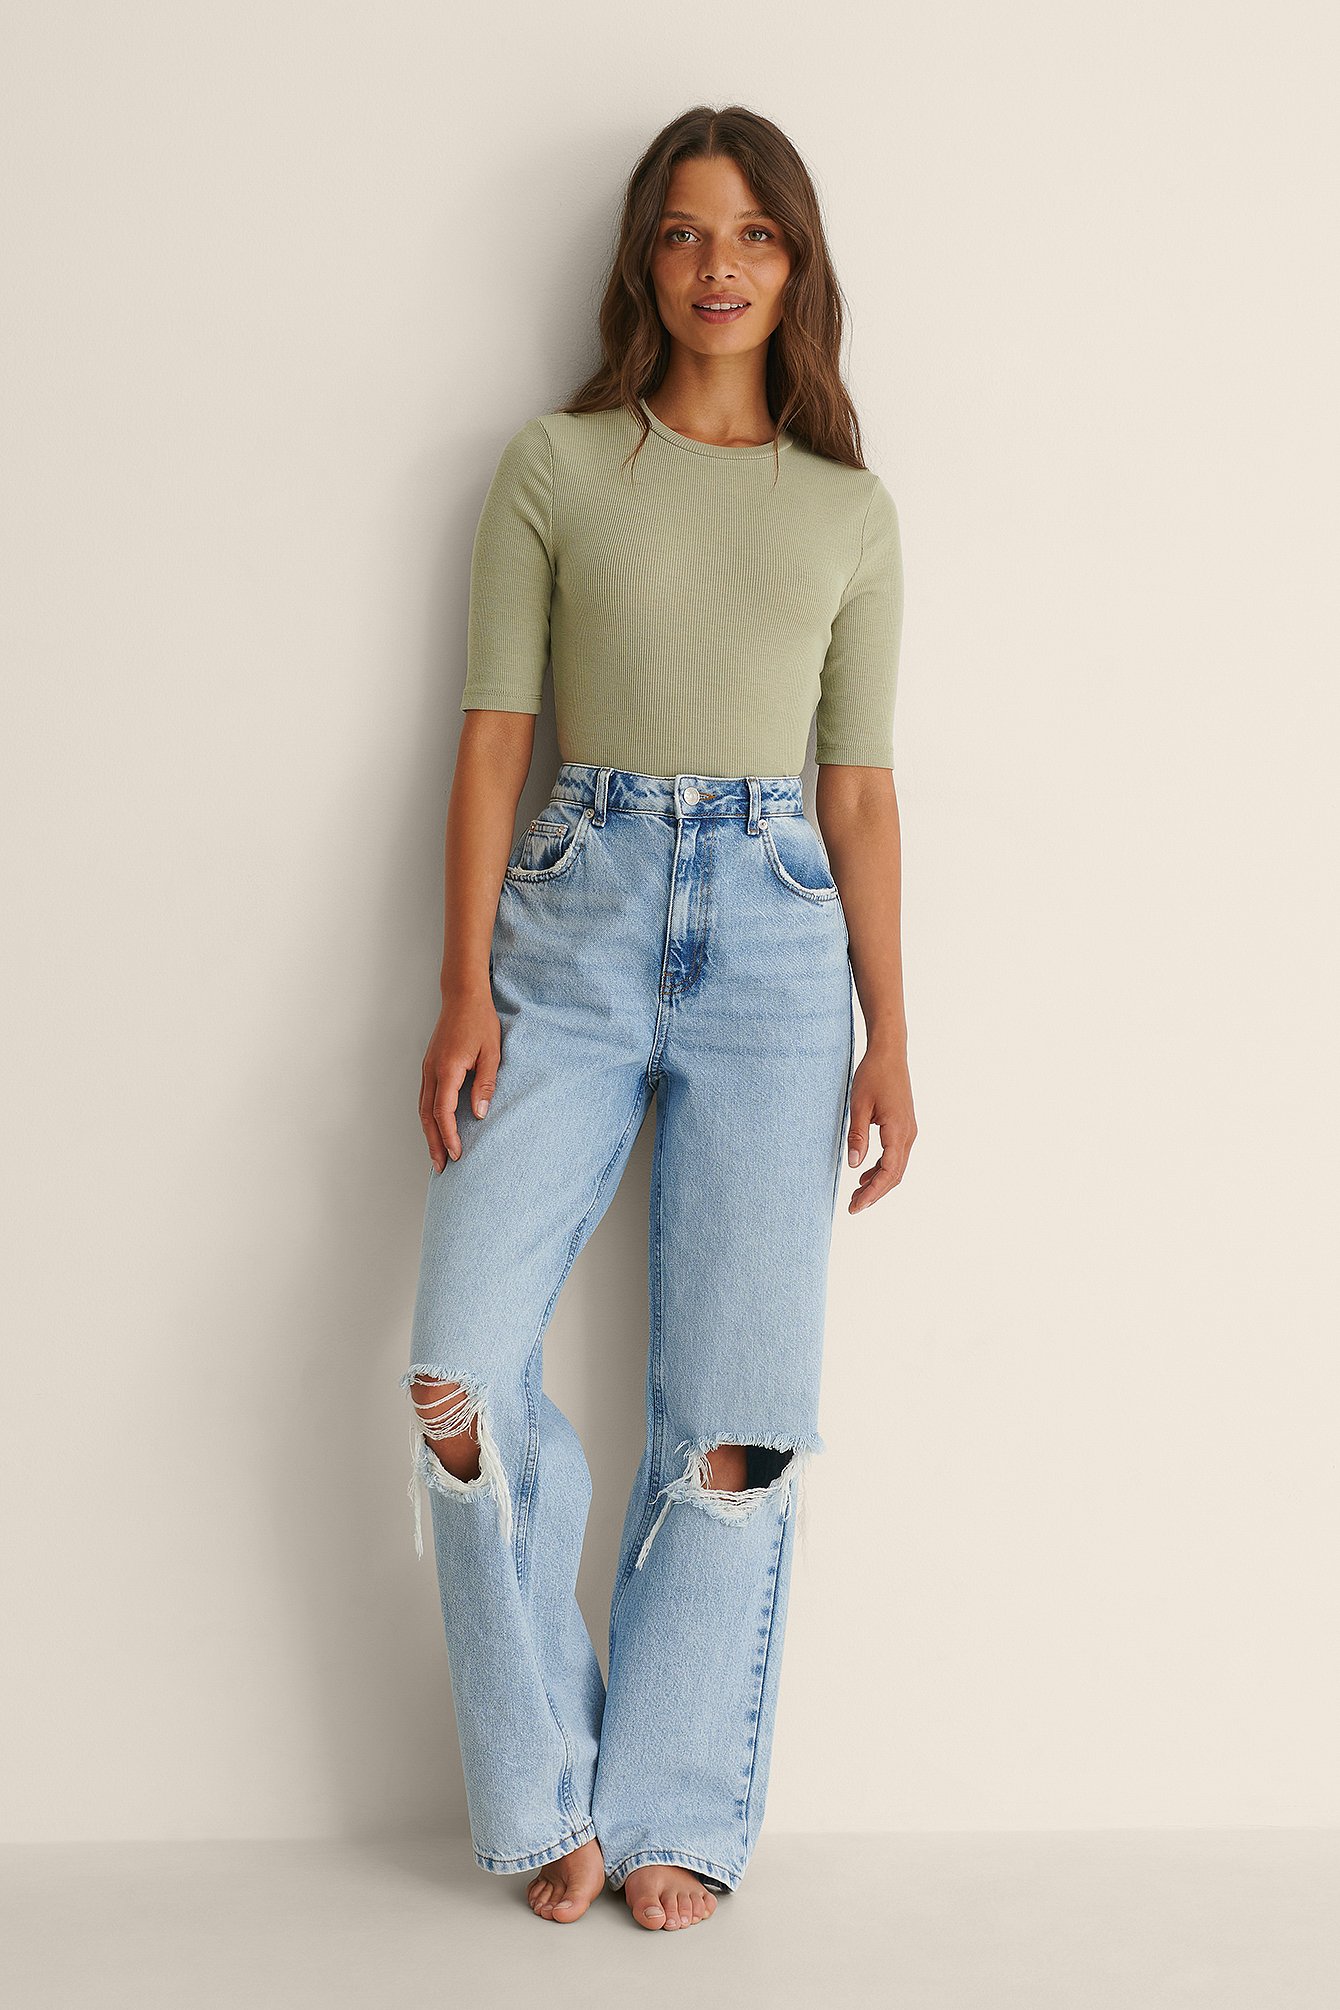 Light Green Round Neck Ribbed Crop Top